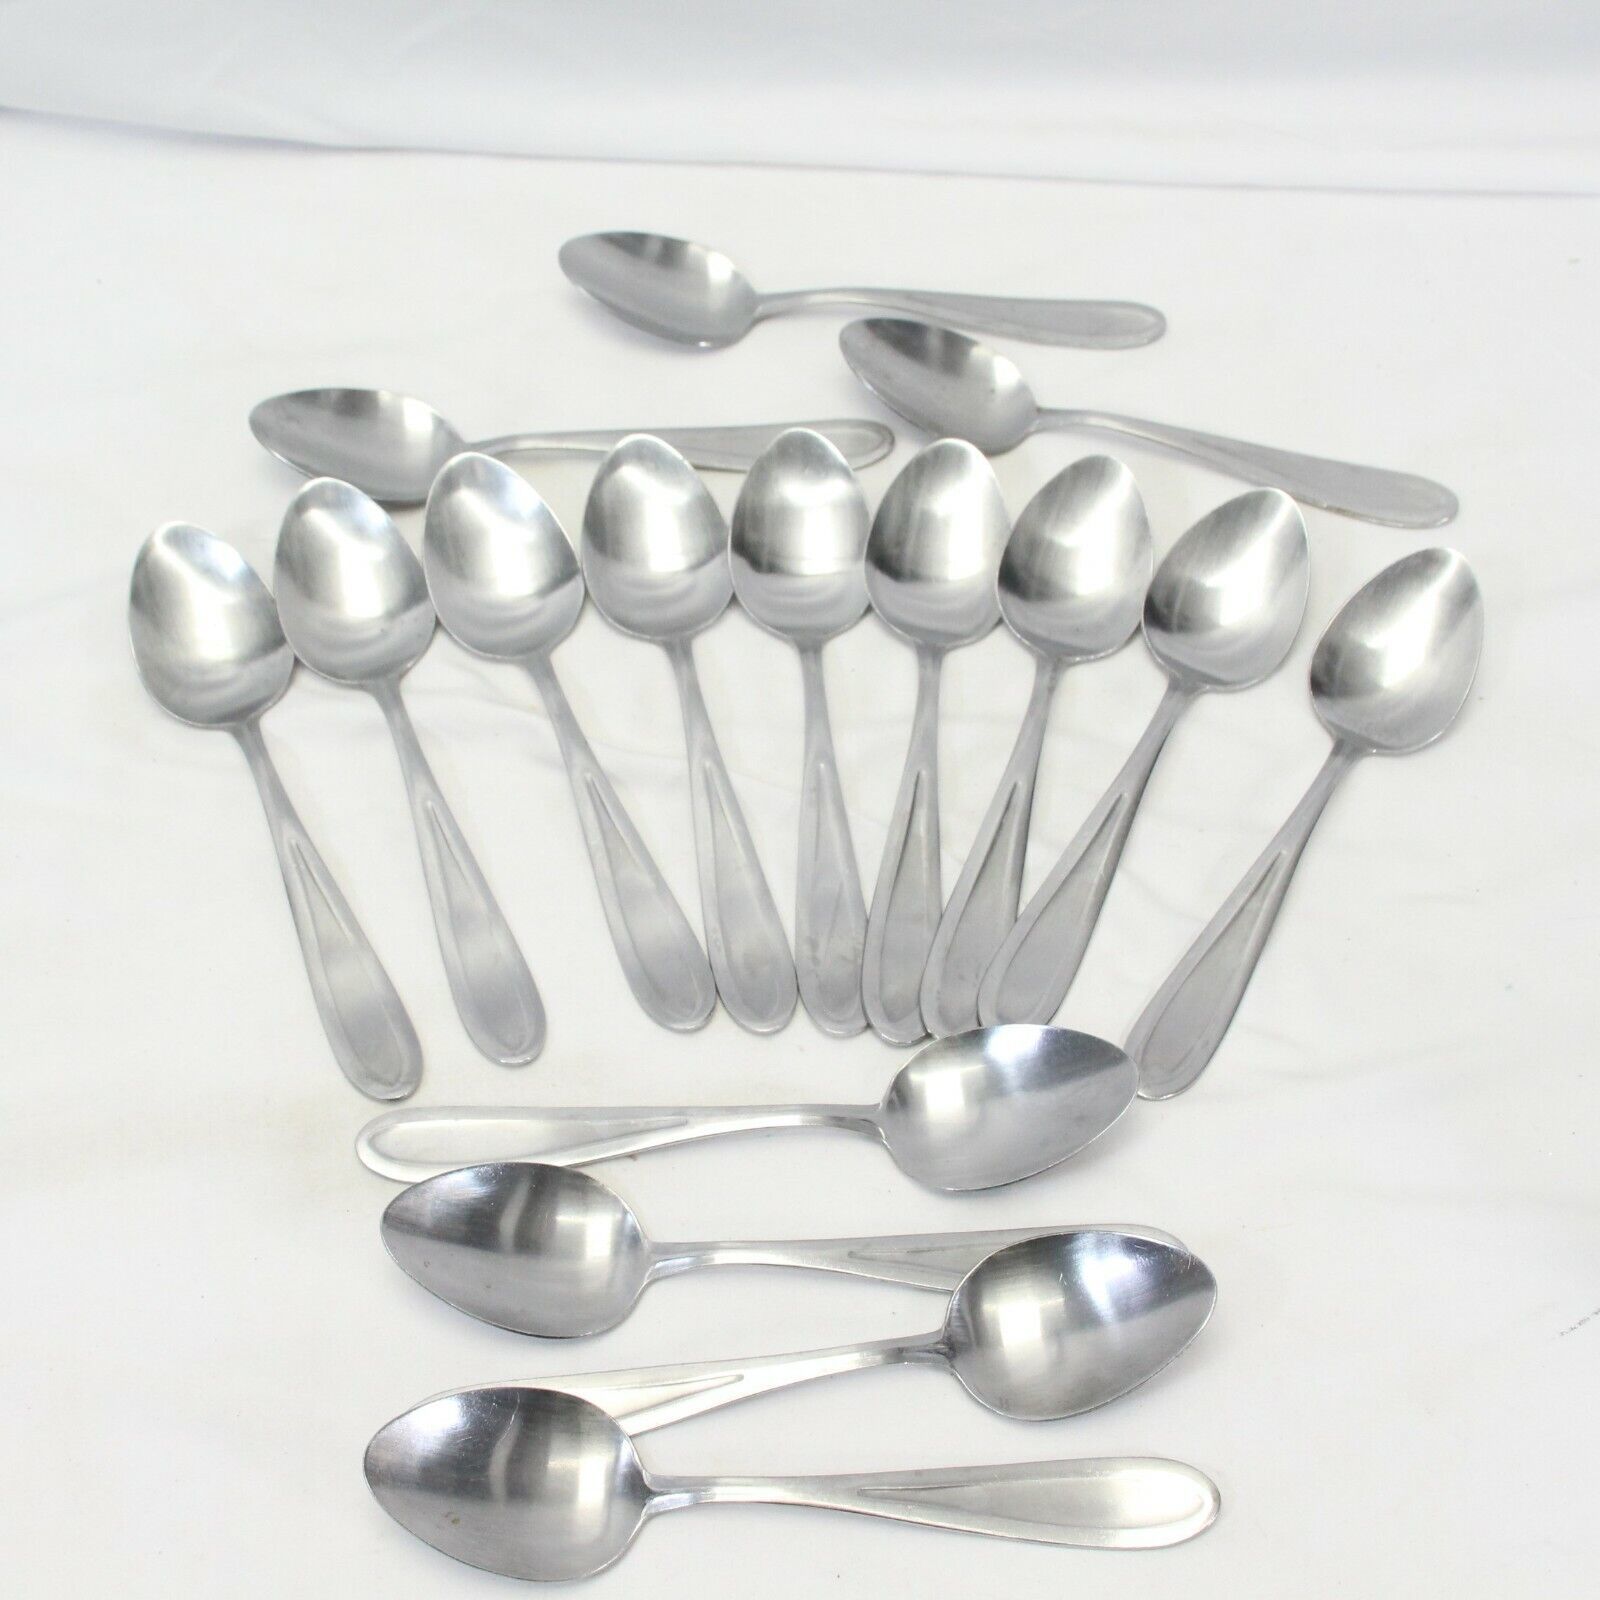 Farberware FRW57 Oval Soup Spoons 7" Lot of 16 - $25.47